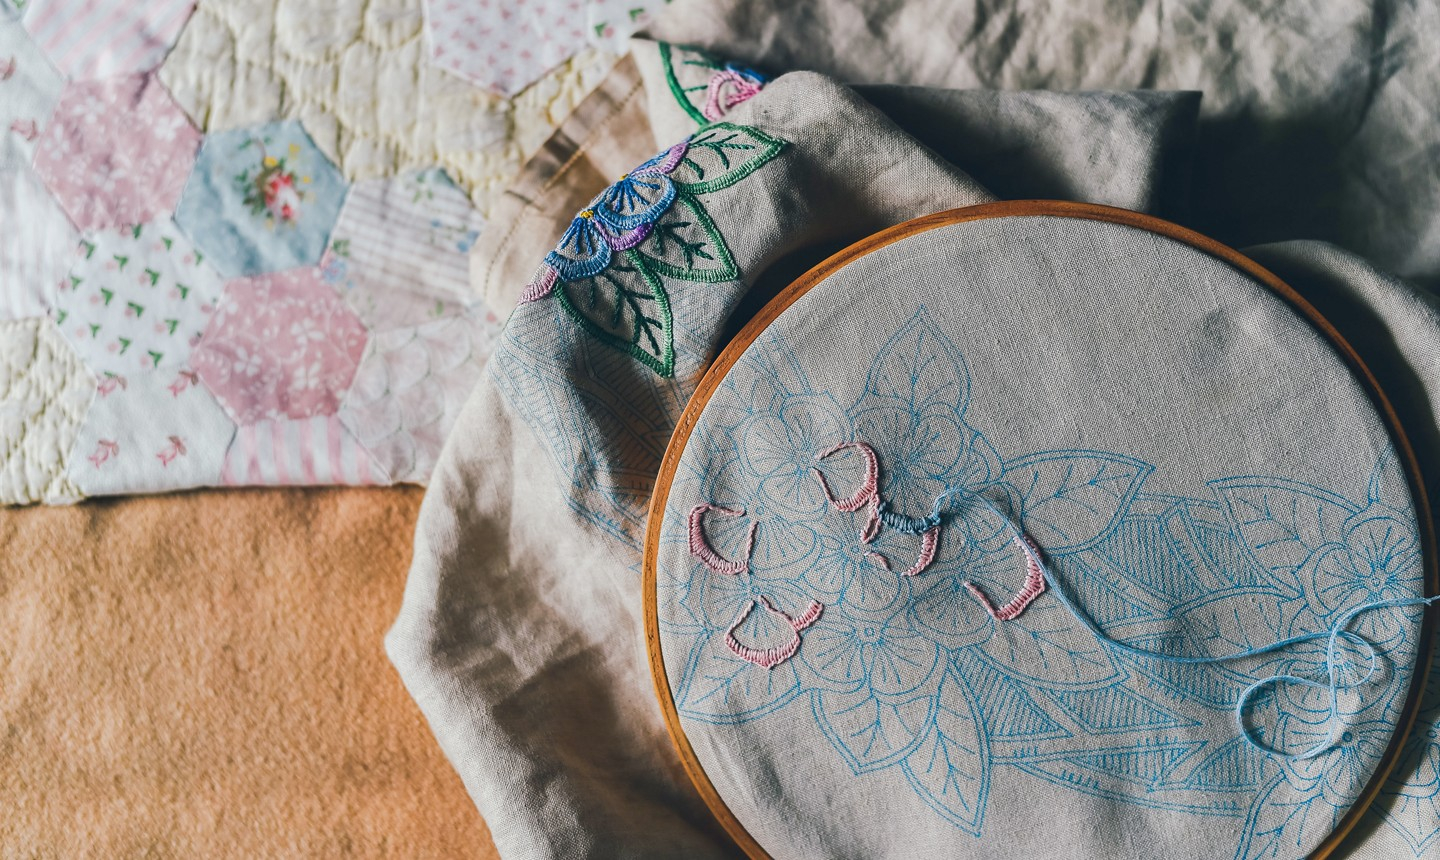 Transfer Patterns For Embroidery 5 Simple Ways To Transfer Embroidery Designs